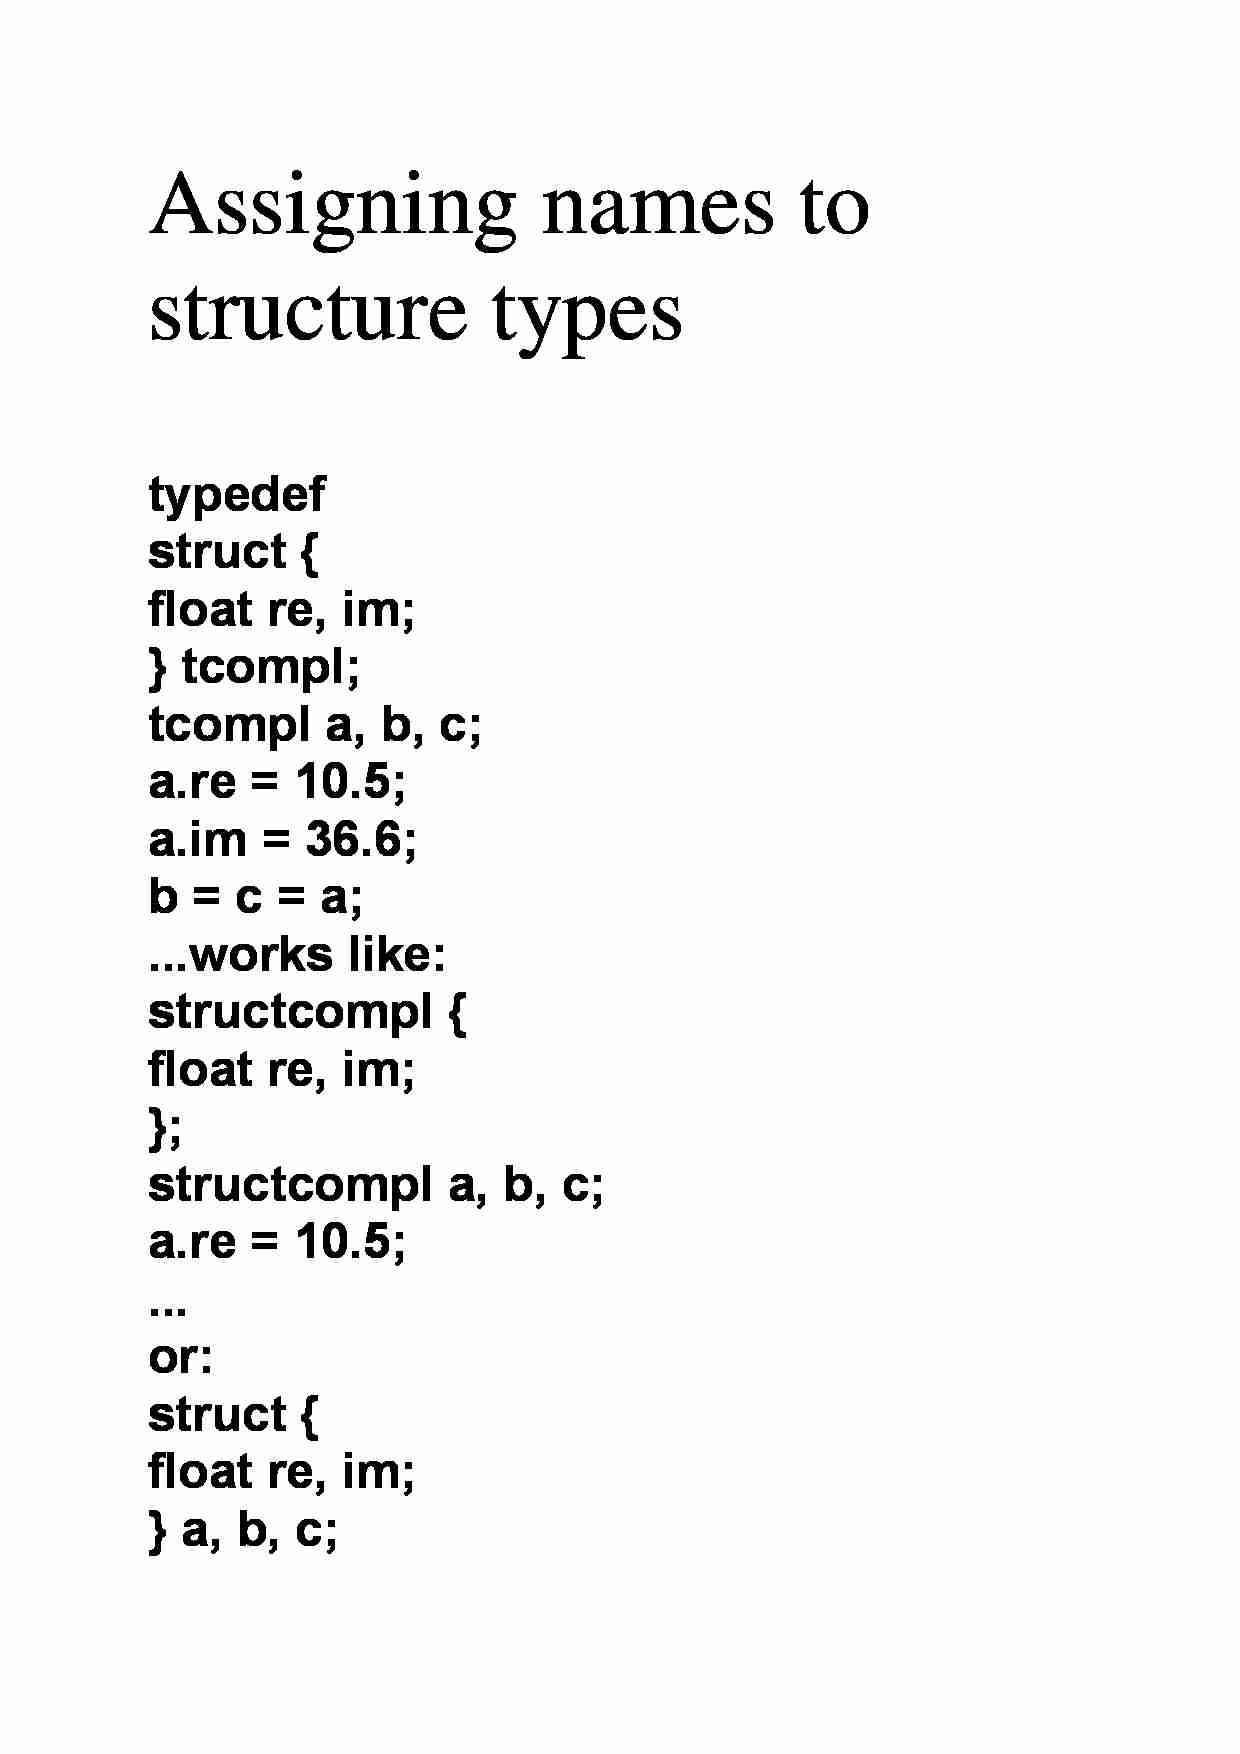 Assigning names to structure types - strona 1